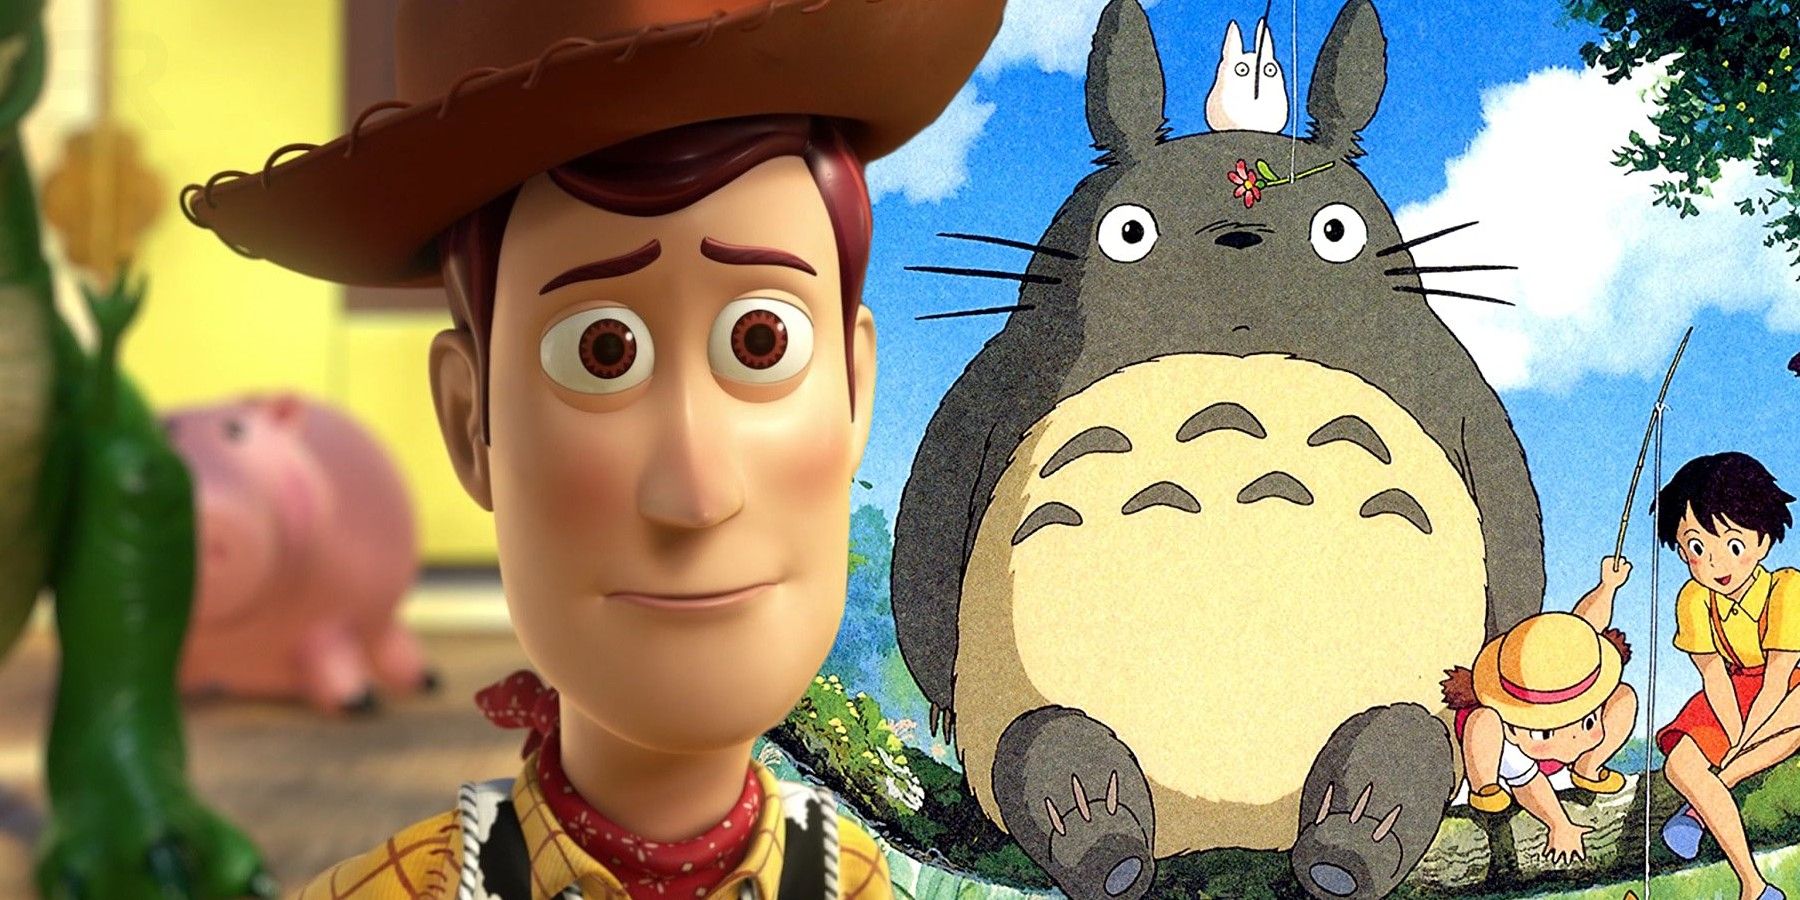 Toy Story 3 Easter Egg References Studio Ghibli’s Totoro